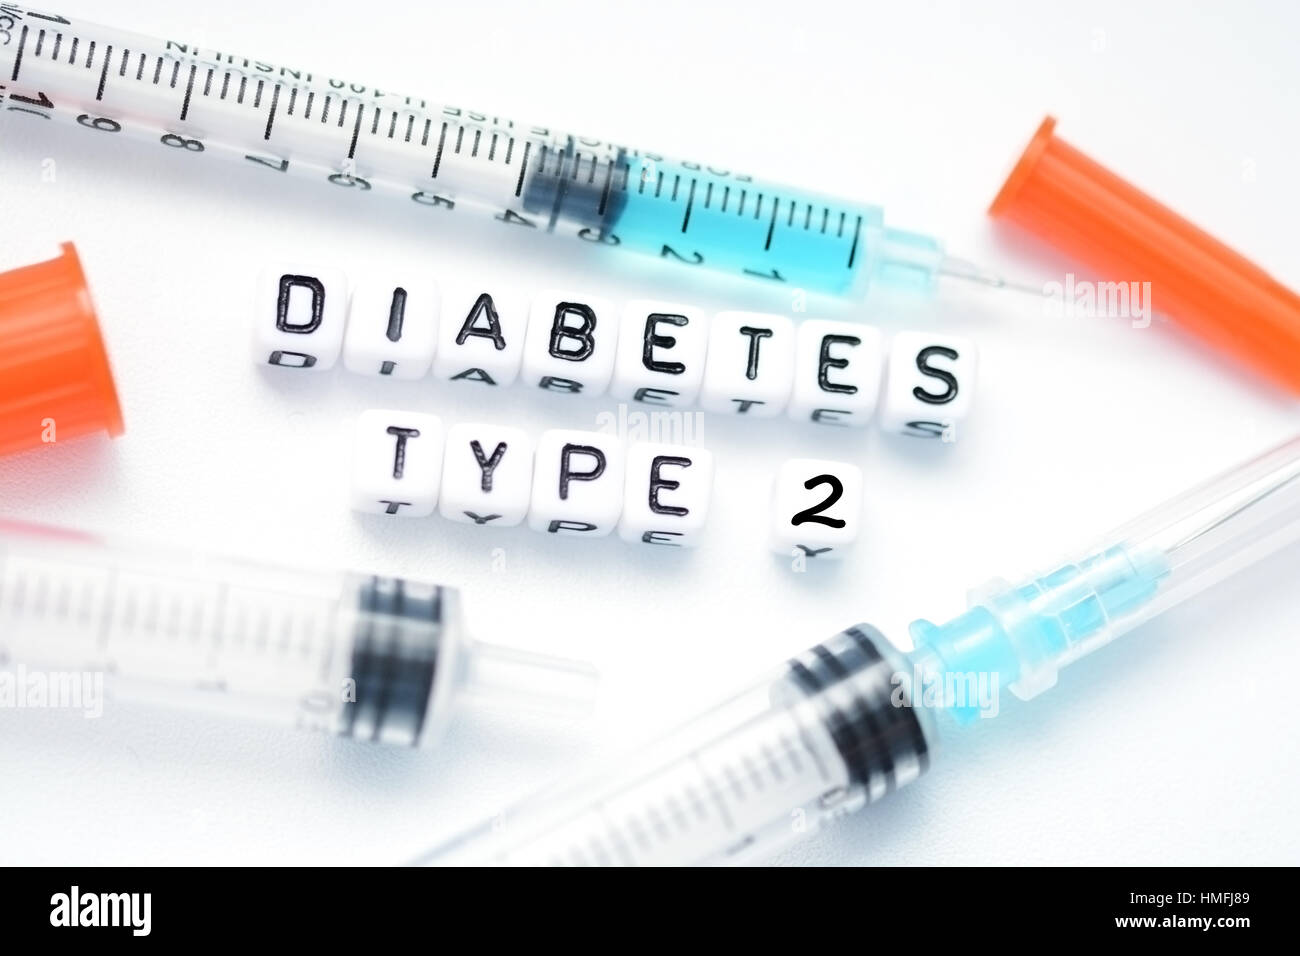 Type 2 diabetes text spelled with plastic letter beads placed next to an insulin syringe Stock Photo